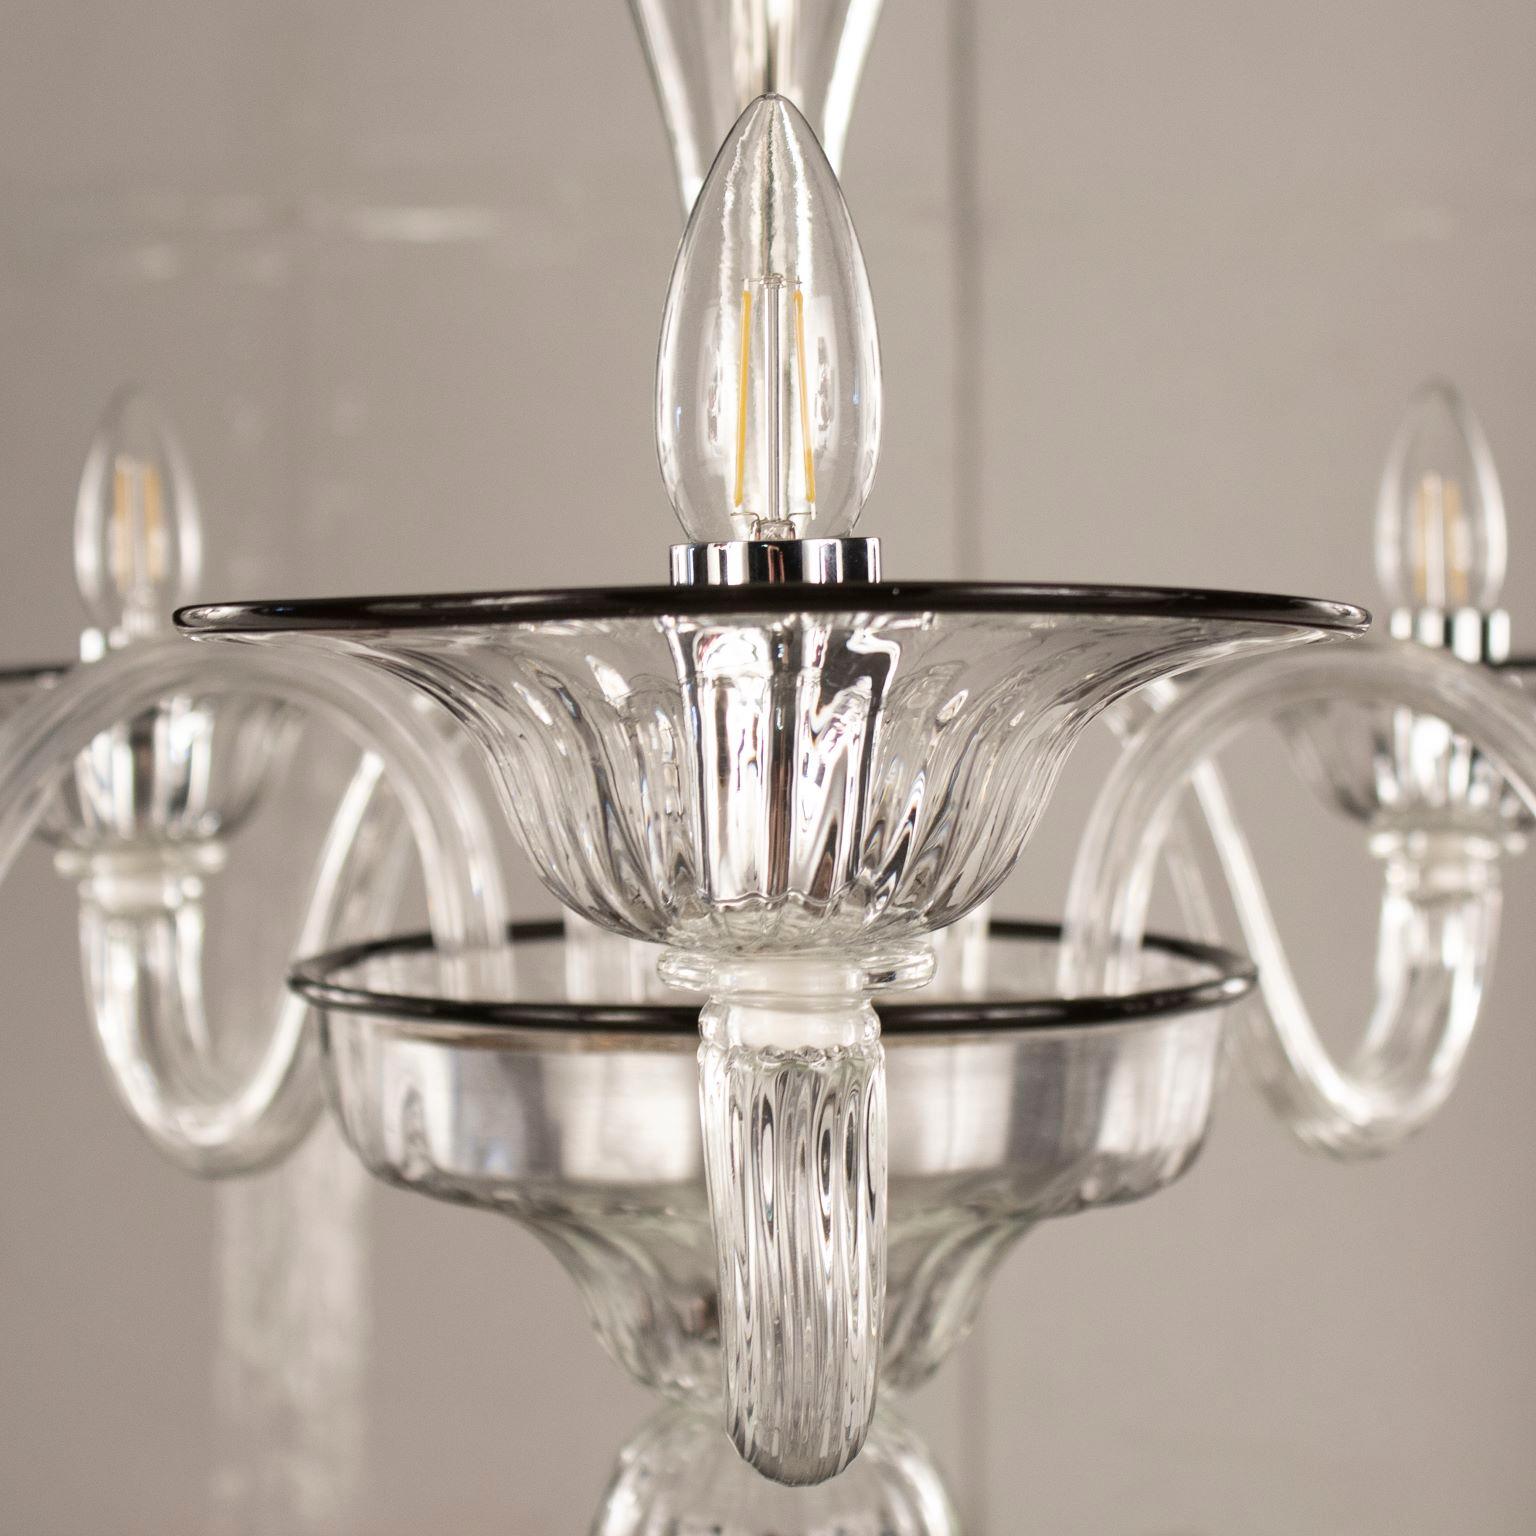 Other 21st Century Chandelier, 5 Arms Crystal Murano Glass Black Details by Multiforme For Sale